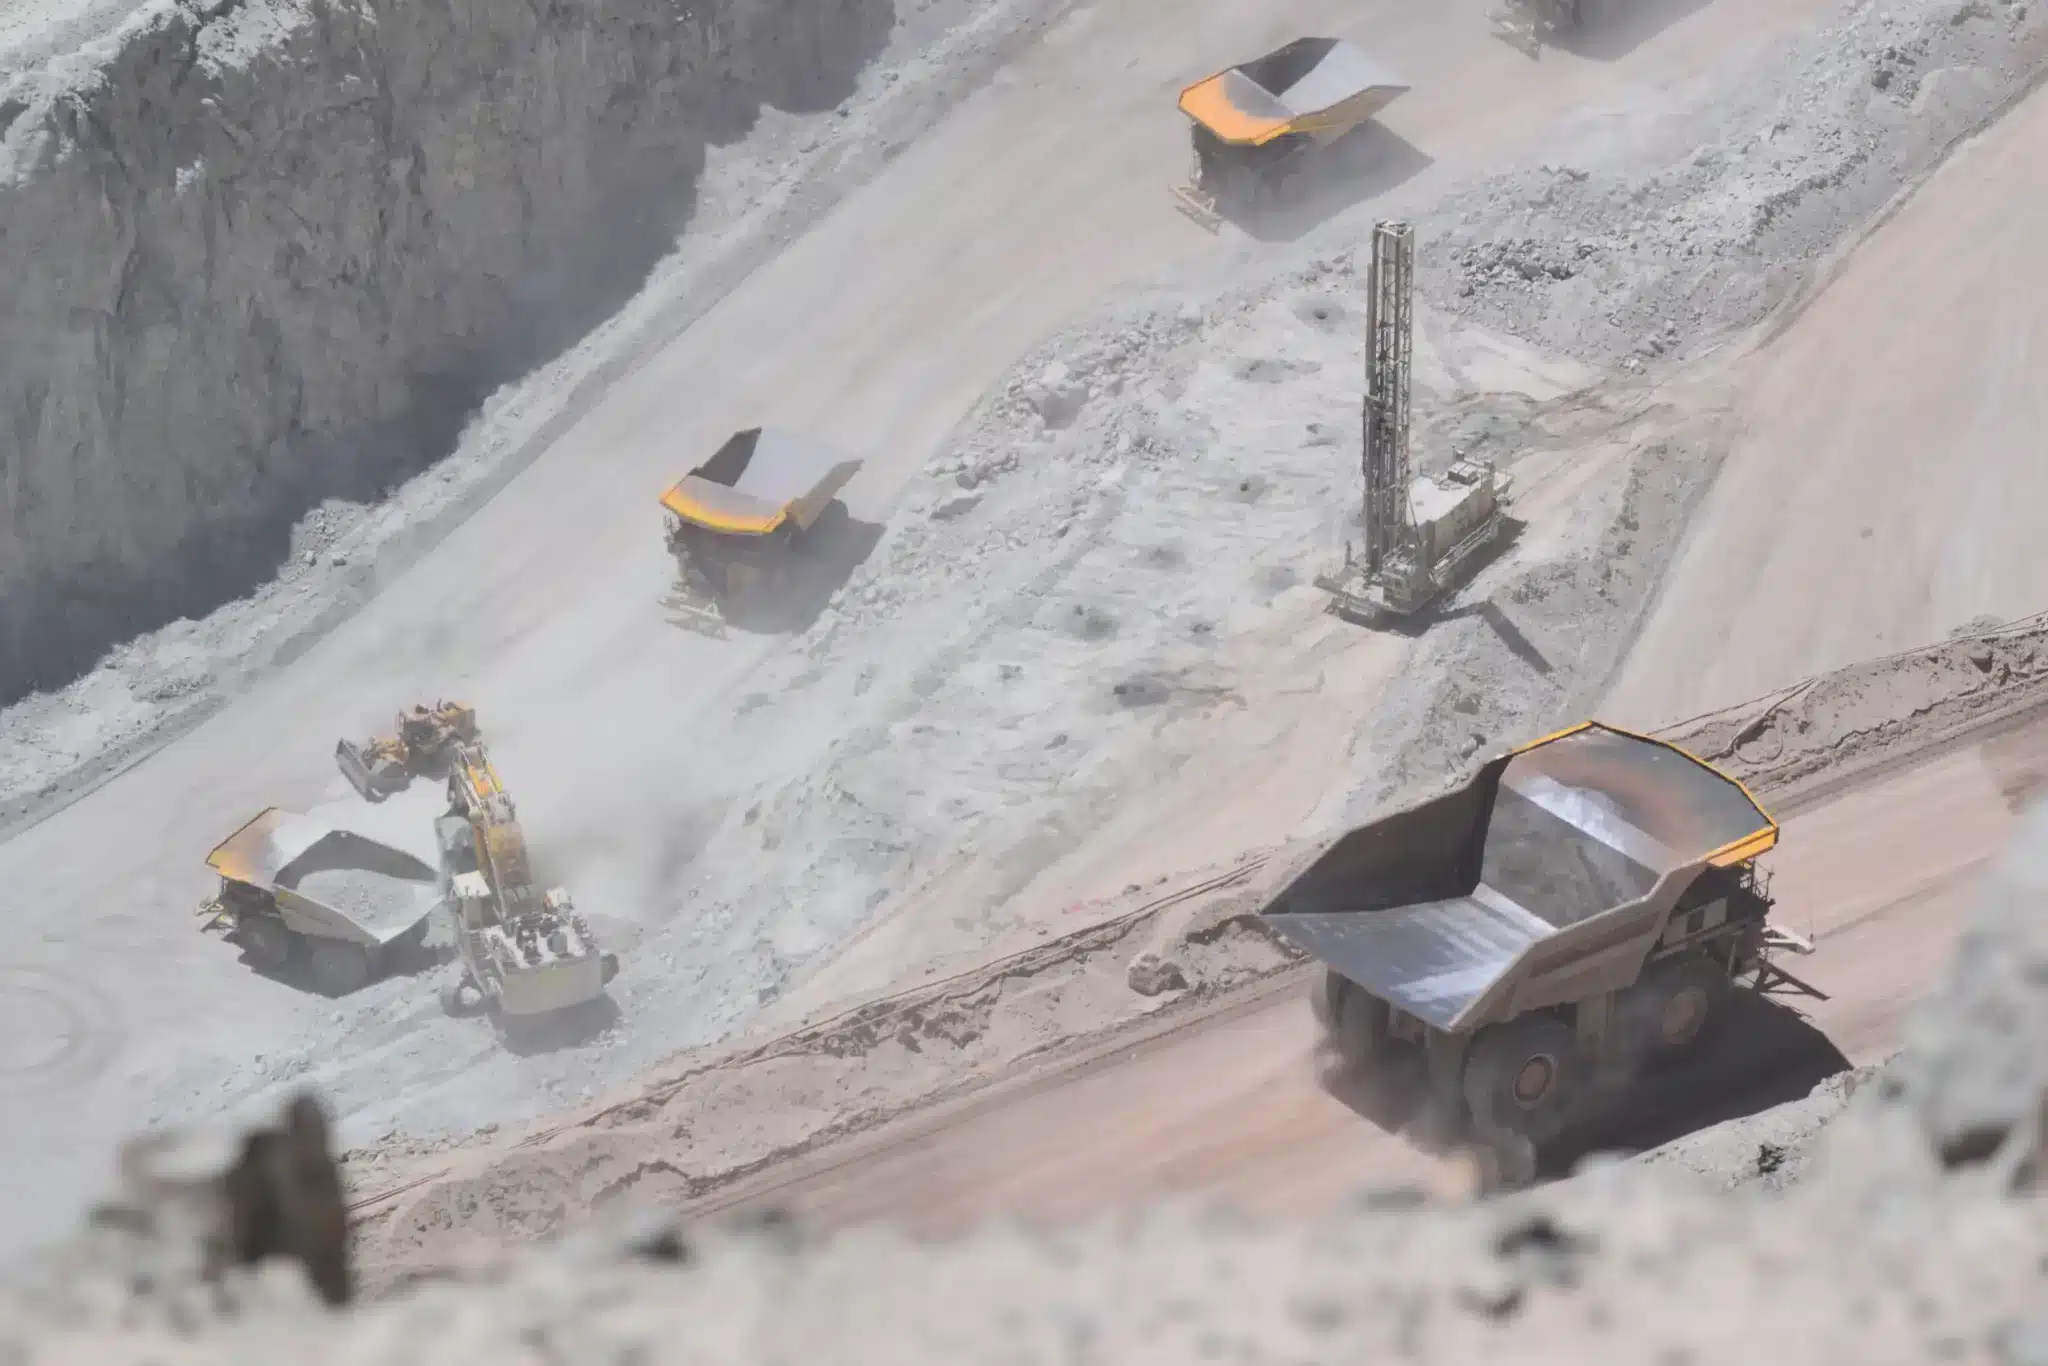 An active open-pit mining operation with large machinery at work. Several heavy dump trucks with yellow beds are visible transporting materials, while an excavator loads one of them. A drilling rig stands in the background amidst a landscape of exposed earth and rock.